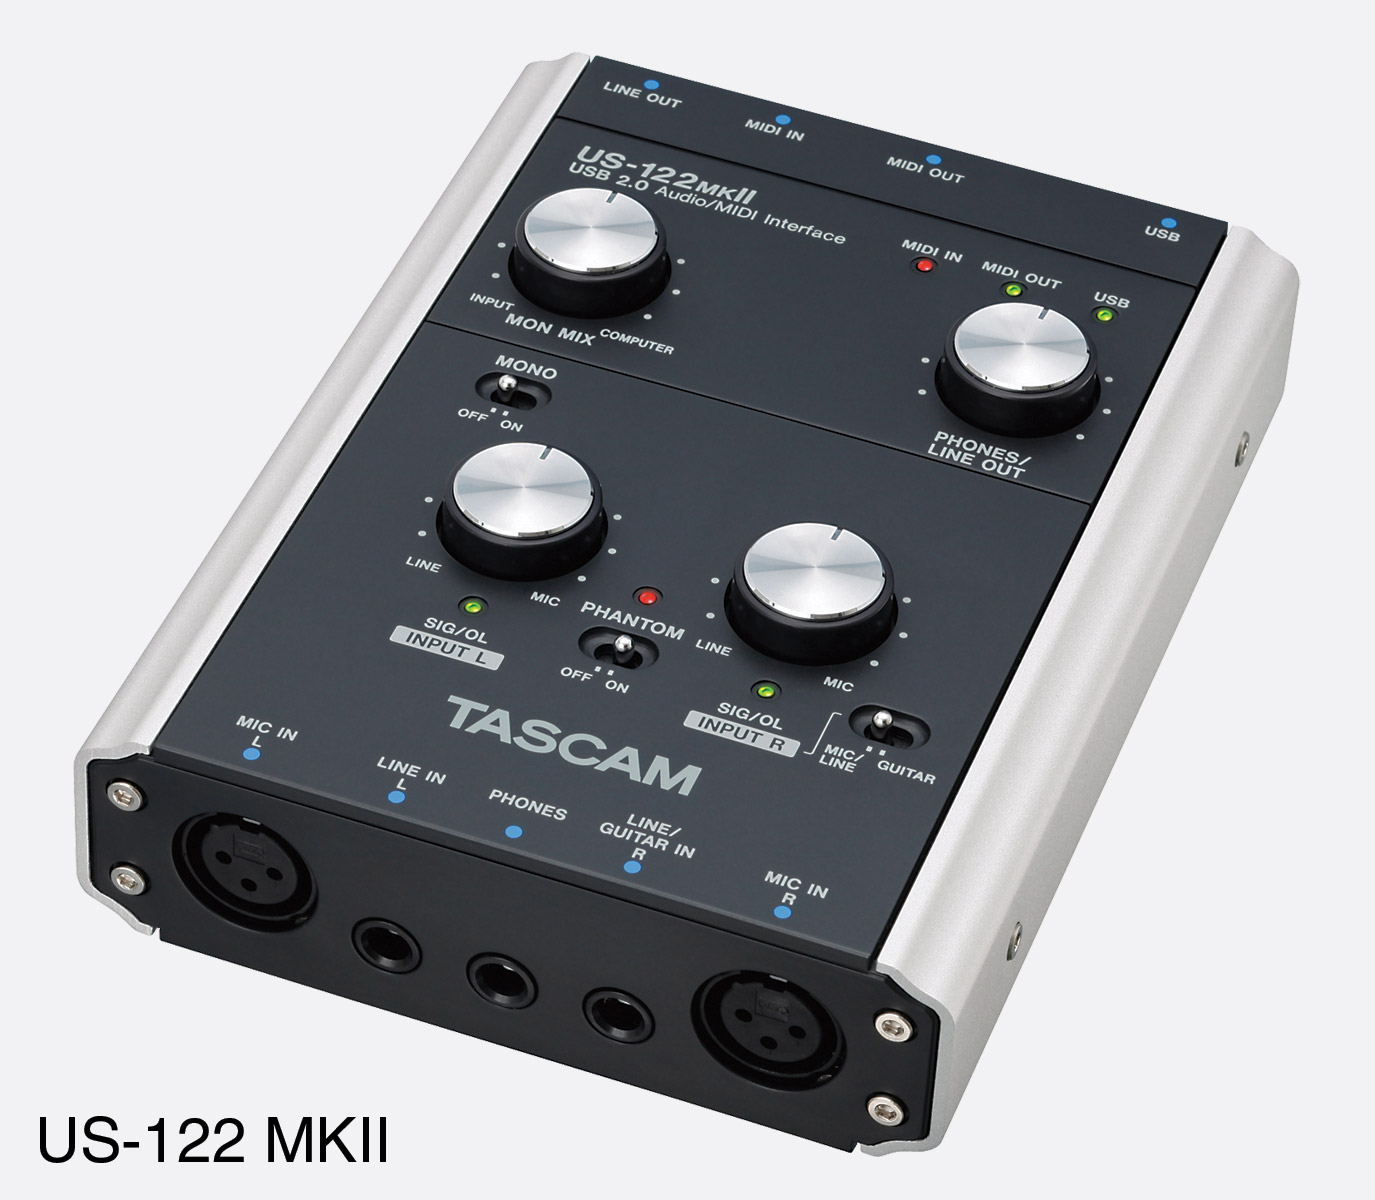 TASCAM US-144MKII USB AUDIO INTERFACE 2x mic/line in, S/PDIF, MIDI I/O,  line, monitor out